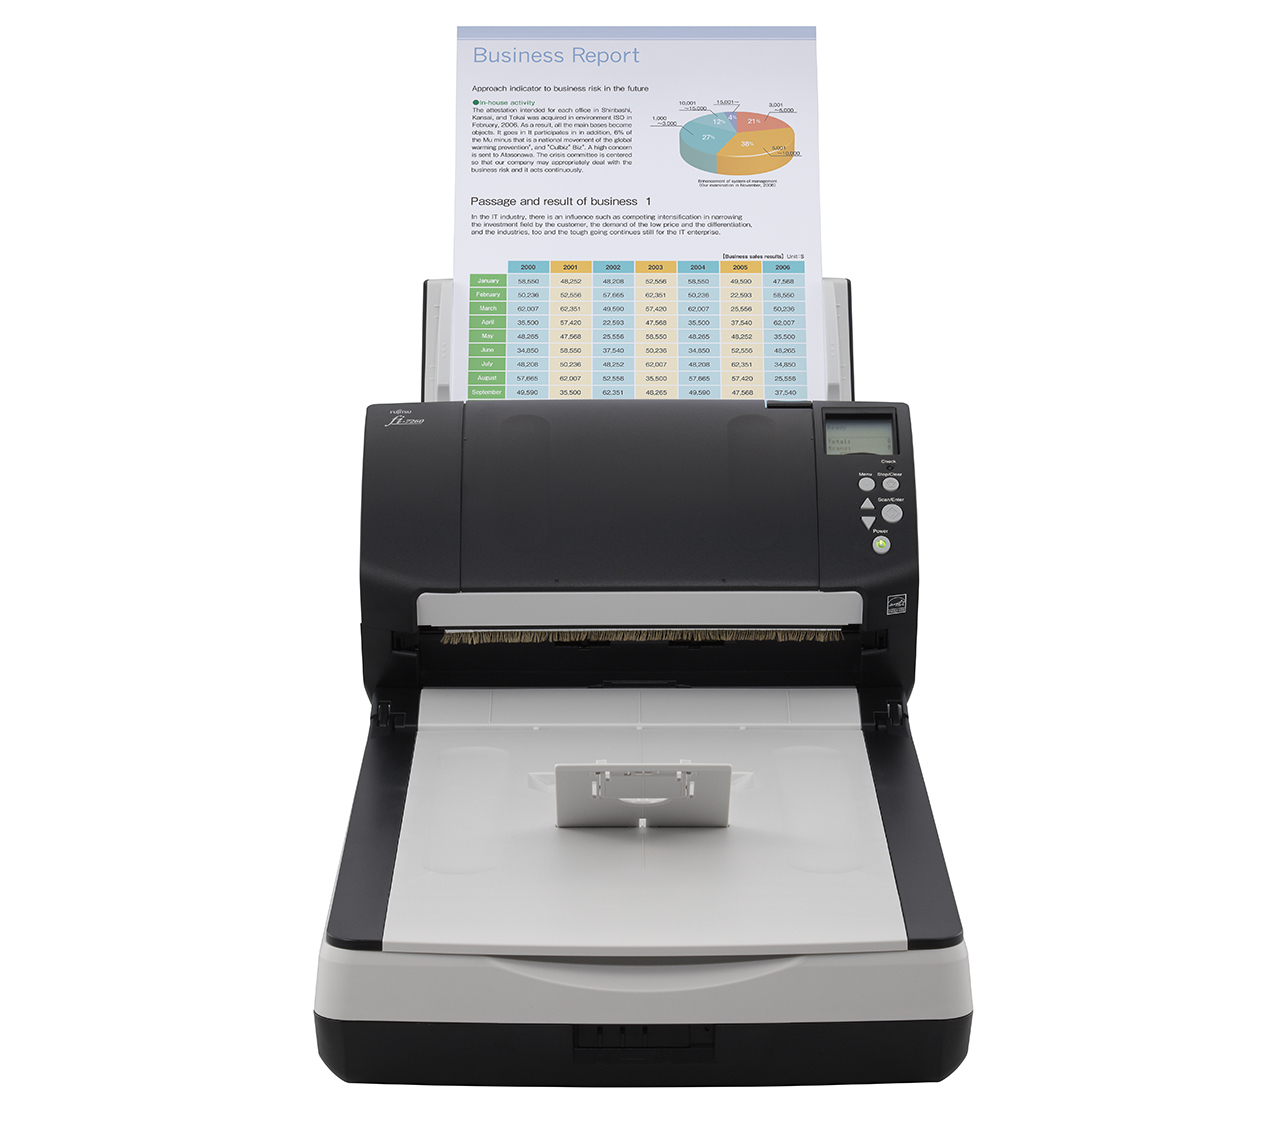 Fujitsu fi-7260 - Document scanner - Triple CCD - Duplex - 8.5 in x 14 in - 600 dpi x 600 dpi - up to 60 ppm (mono) / up to 60 ppm (color) - ADF (80 sheets) - up to 4000 scans per day - USB 3.0